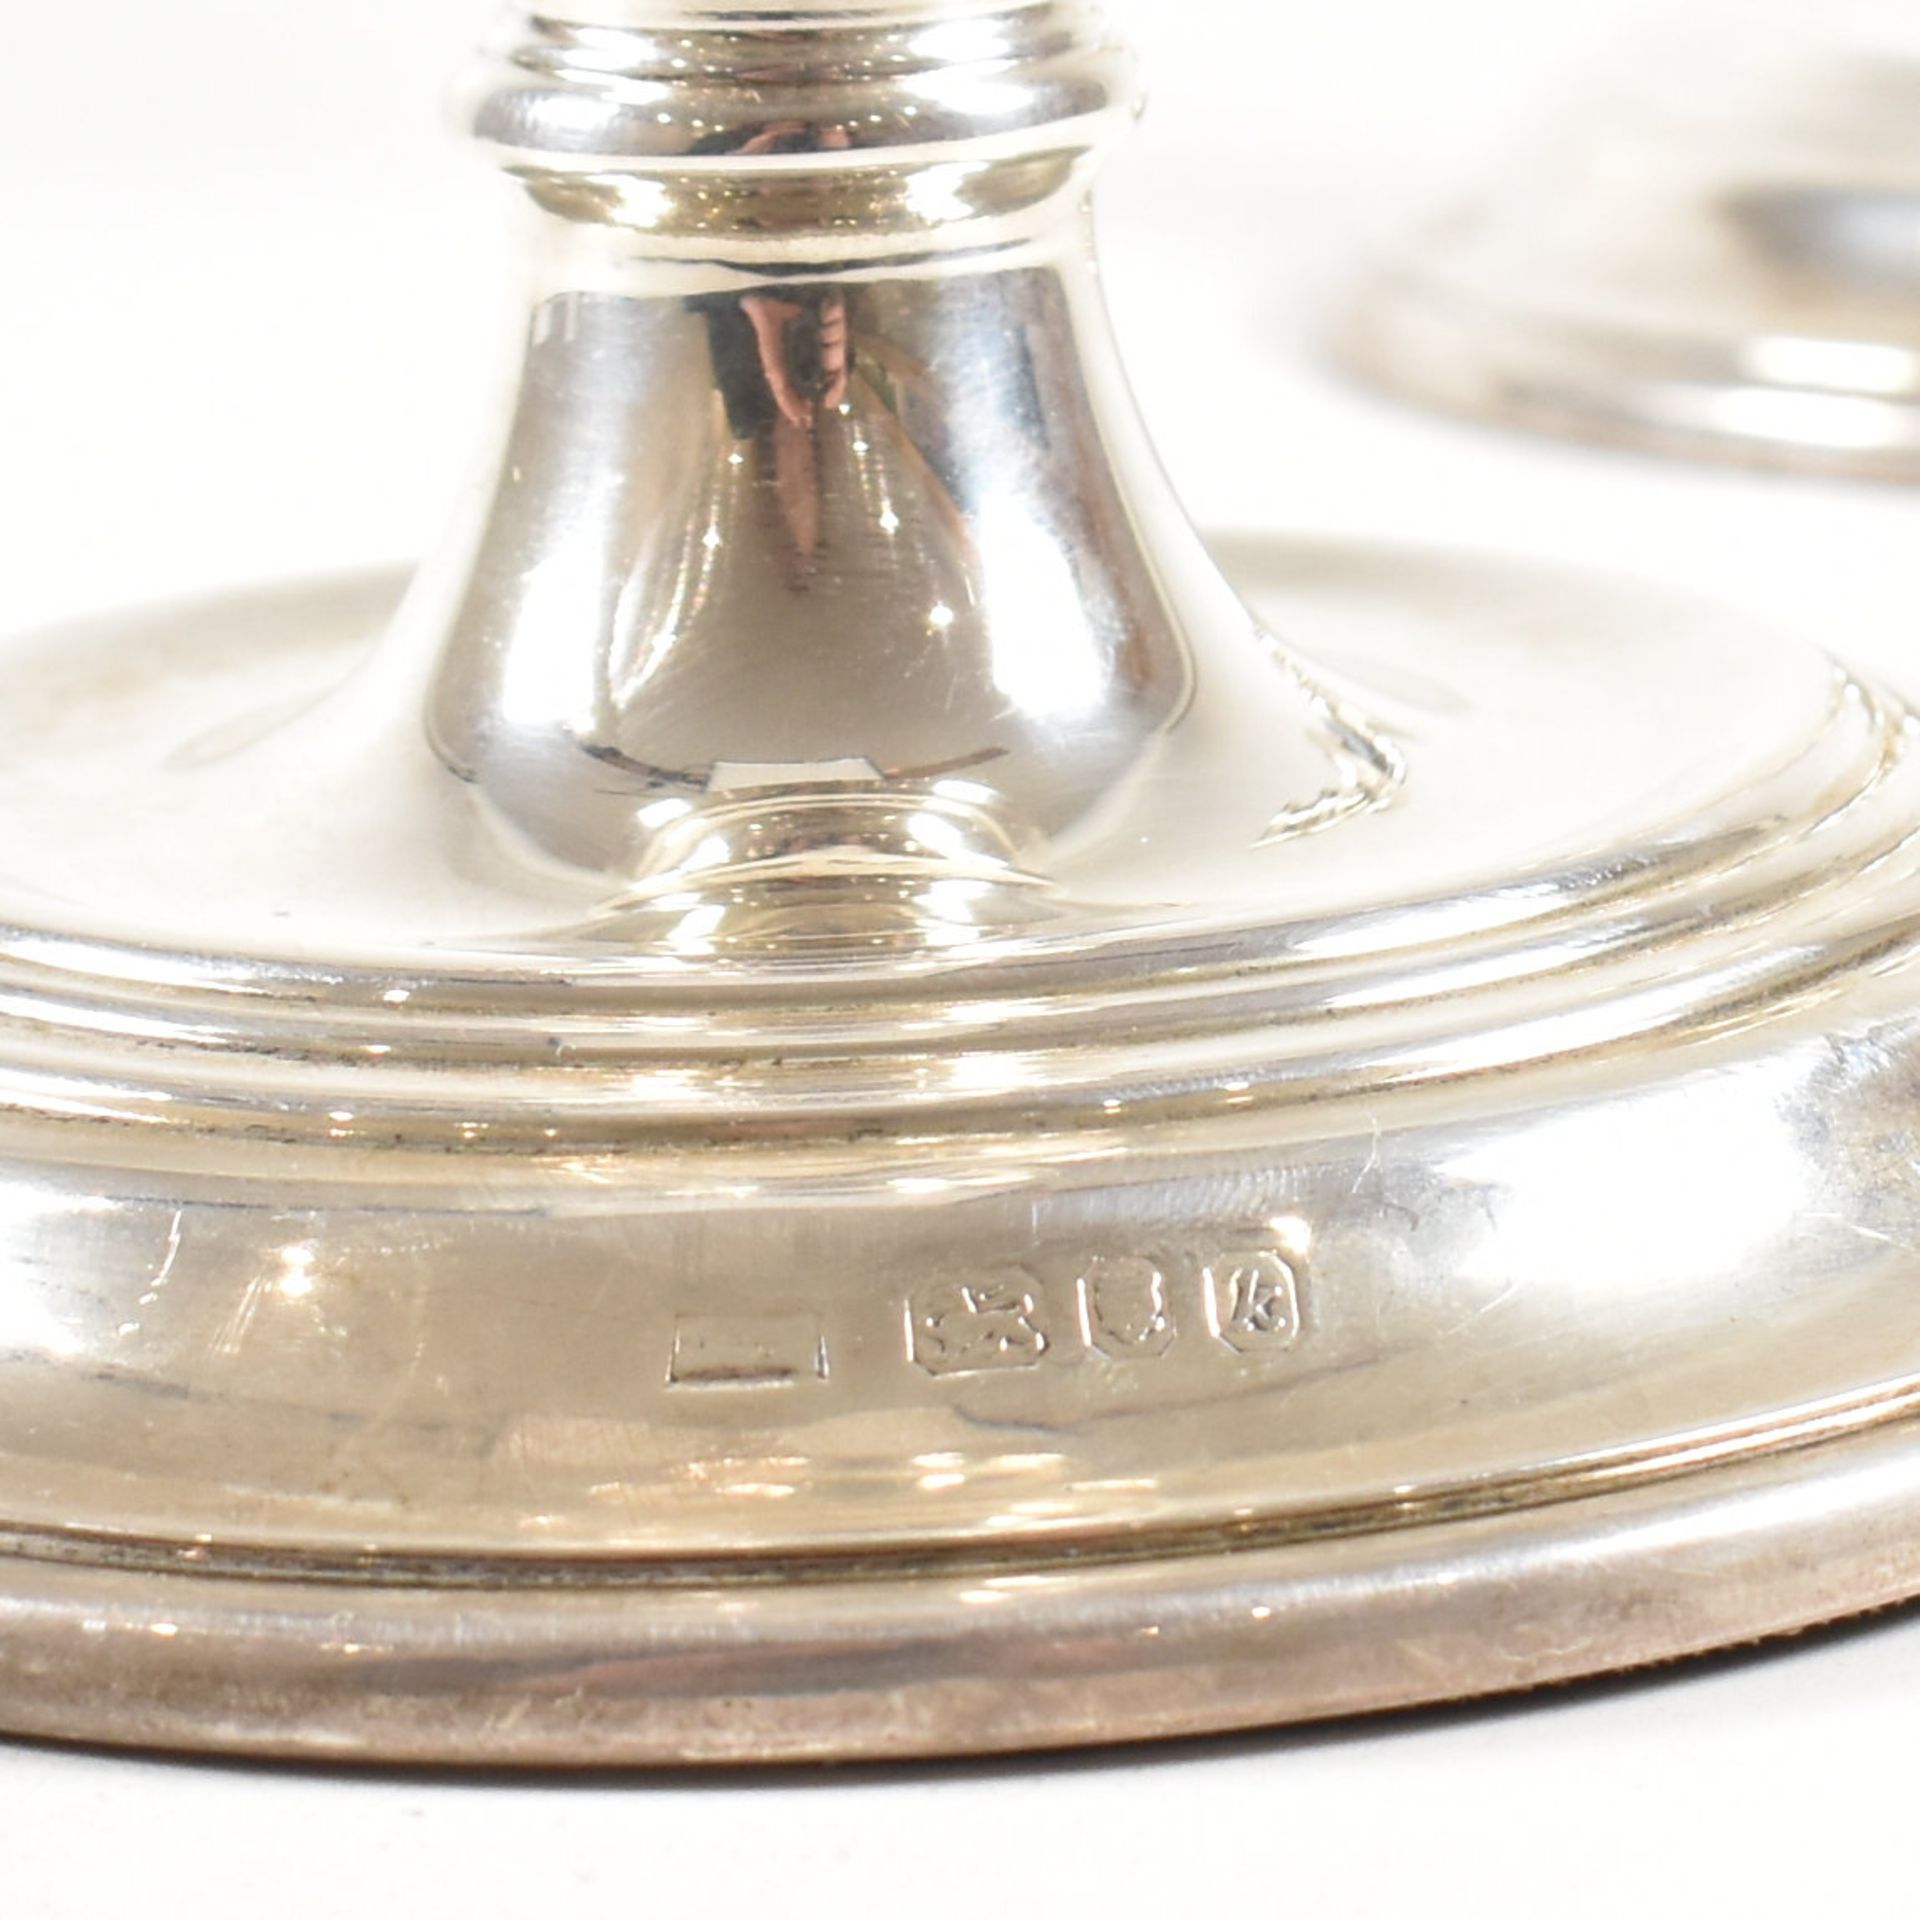 MATCHED PAIR OF MID CENTURY HALLMARKED SILVER CANDLESTICKS - Image 3 of 6